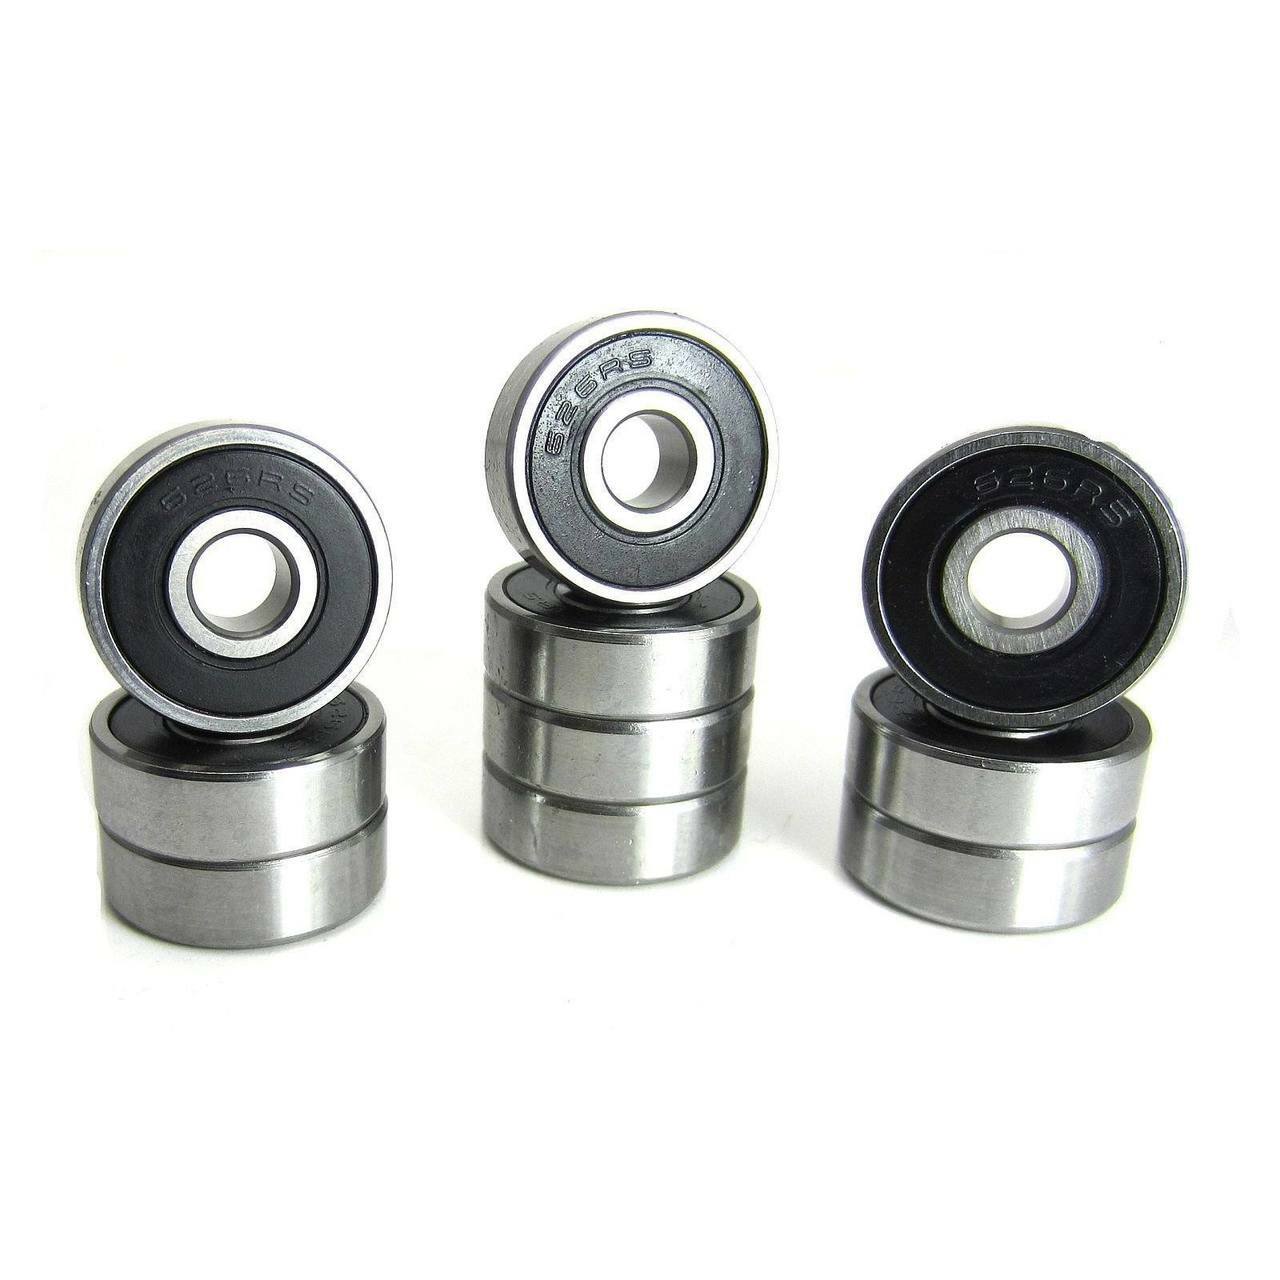 626-2RS 6x19x6mm Precision High Speed Ball Bearing, Chrome Steel (GCr15) with Black Rubber Seals ABEC-1 ABEC-3 ABEC-5